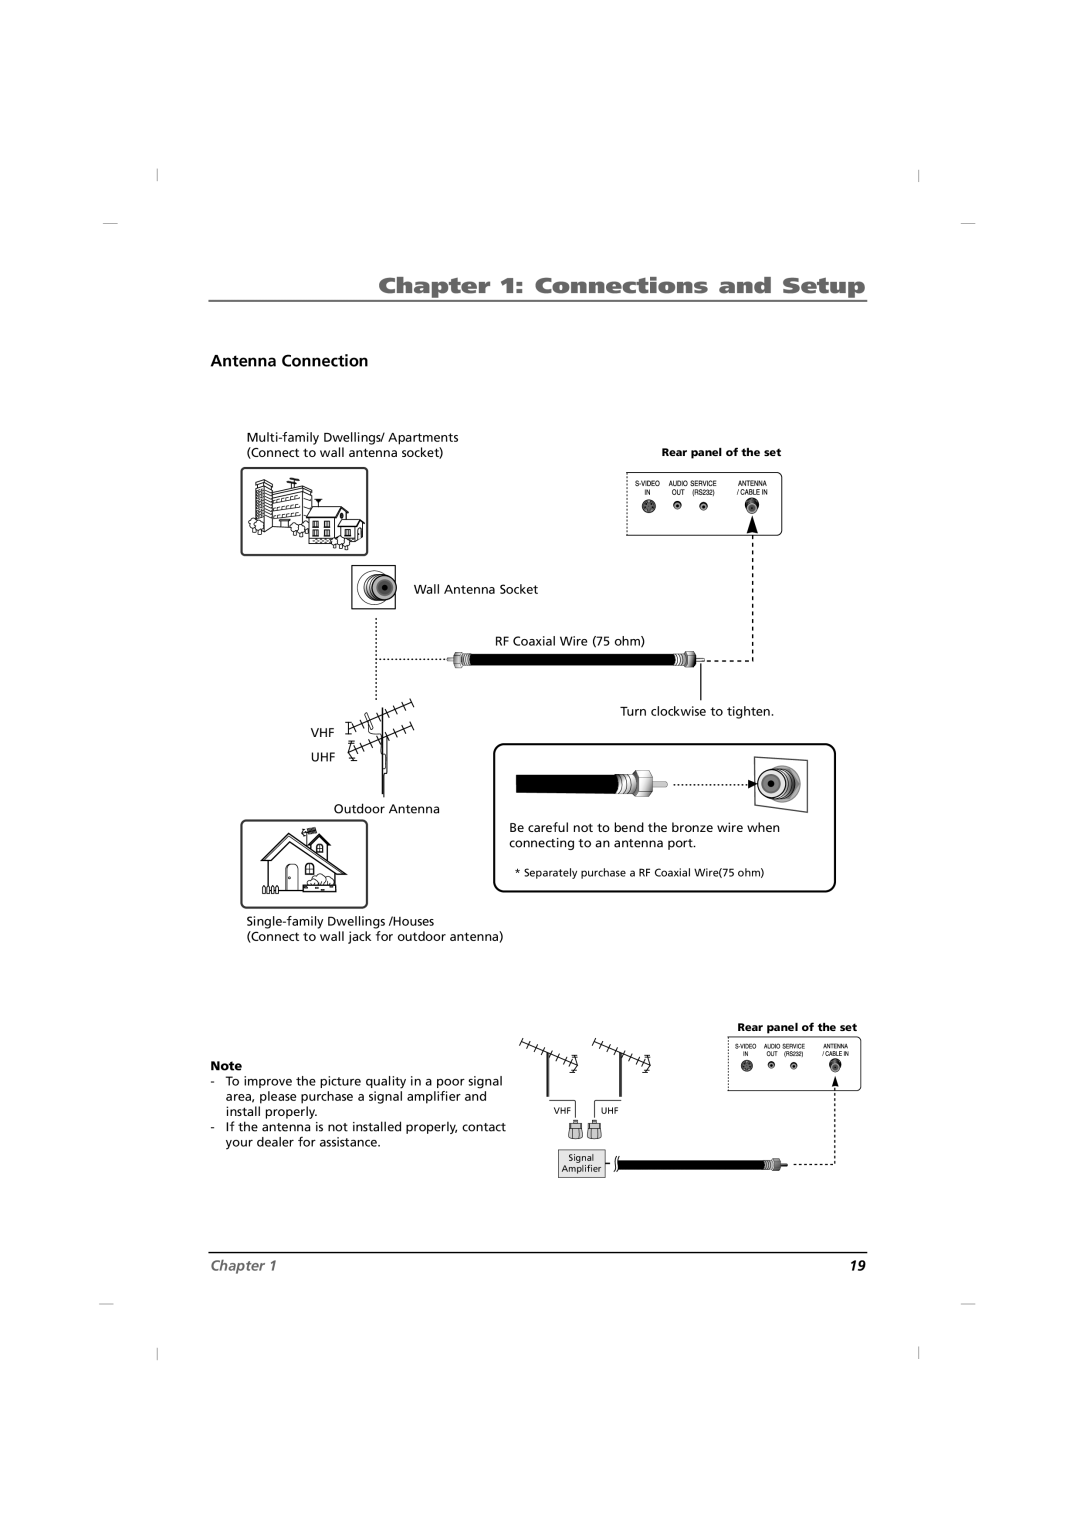 RCA J32CE720, J42CE820, J26CE820 manual Antenna Connection, Connections and Setup, Chapter 